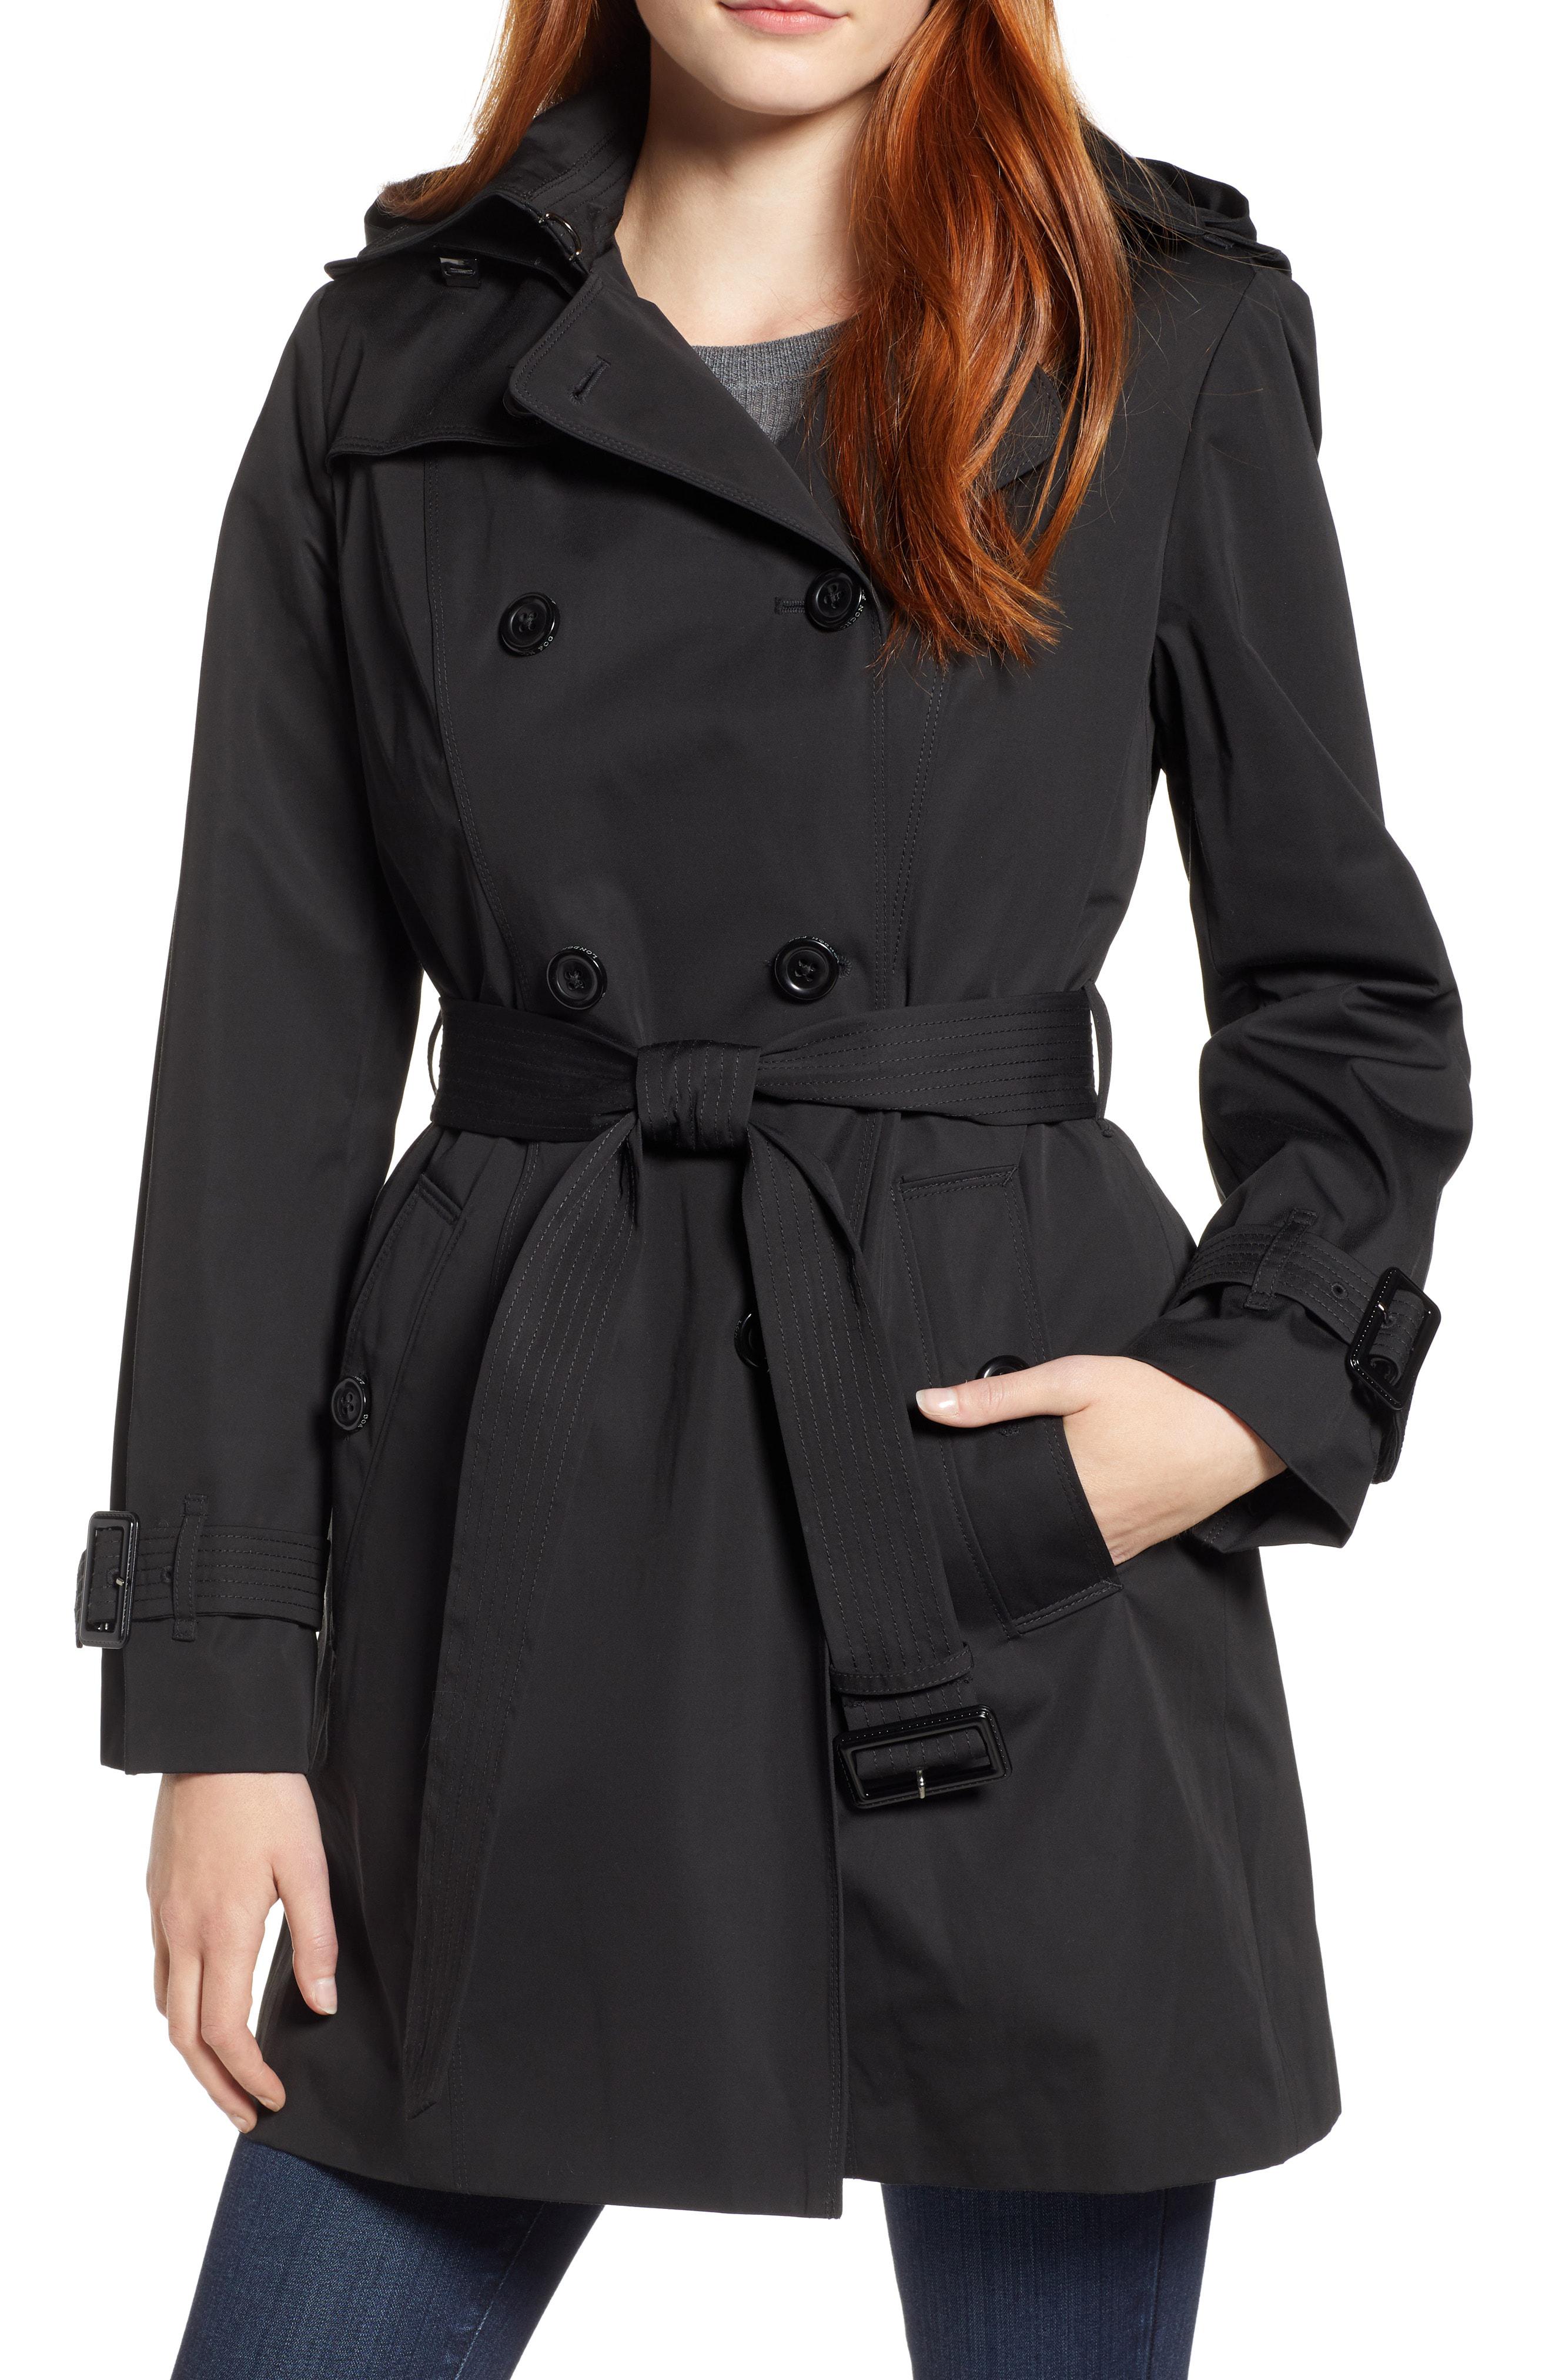 Lyst - London Fog Trench Coat With Detachable Liner & Hood in Black